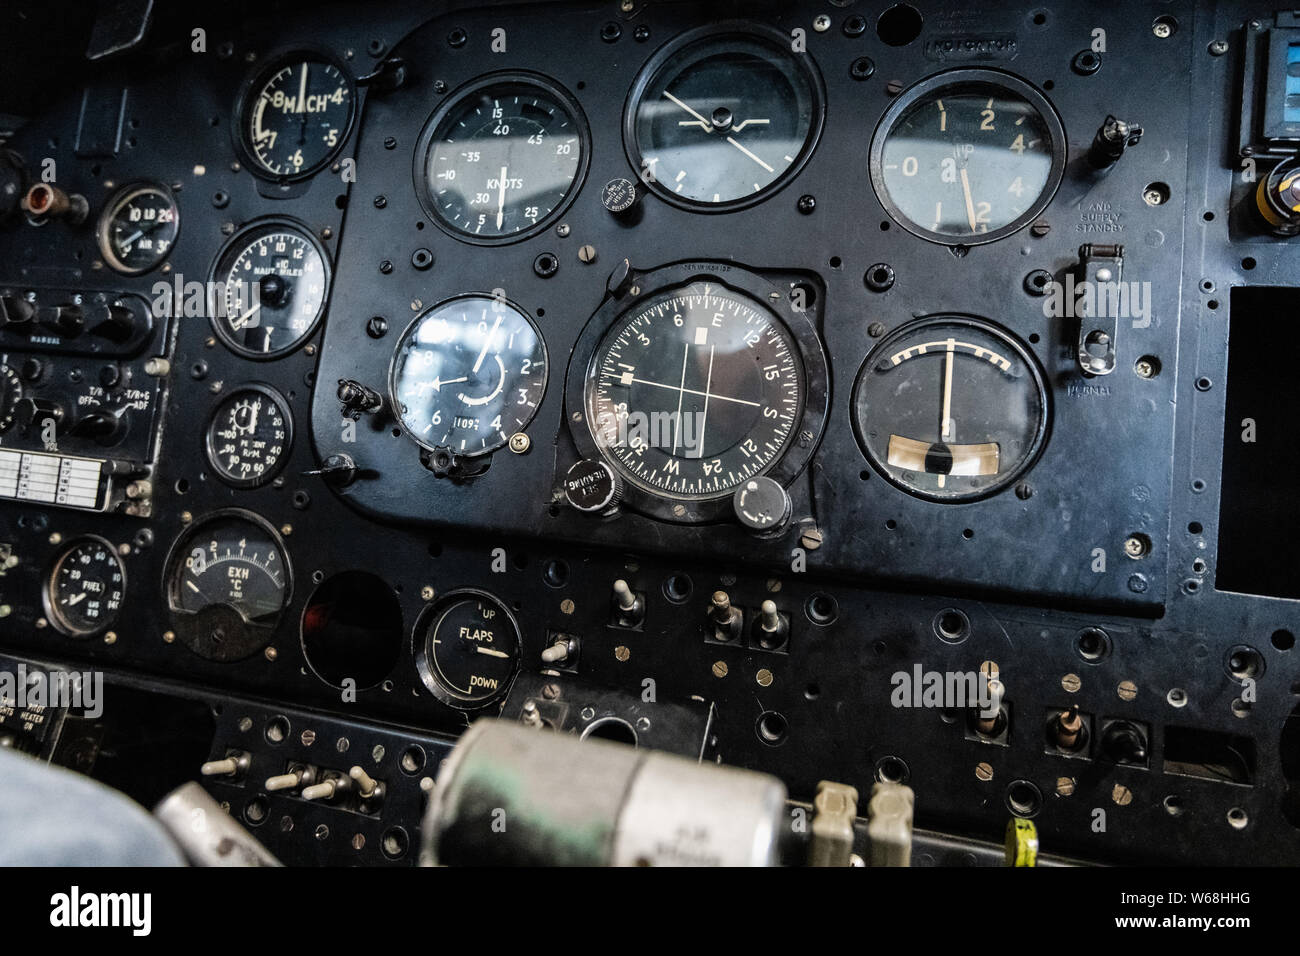 DONCASTER, UK - 28TH JULY 2019: Close up of a planes cockpit showing instruments and panels from a two seater airplane Stock Photo